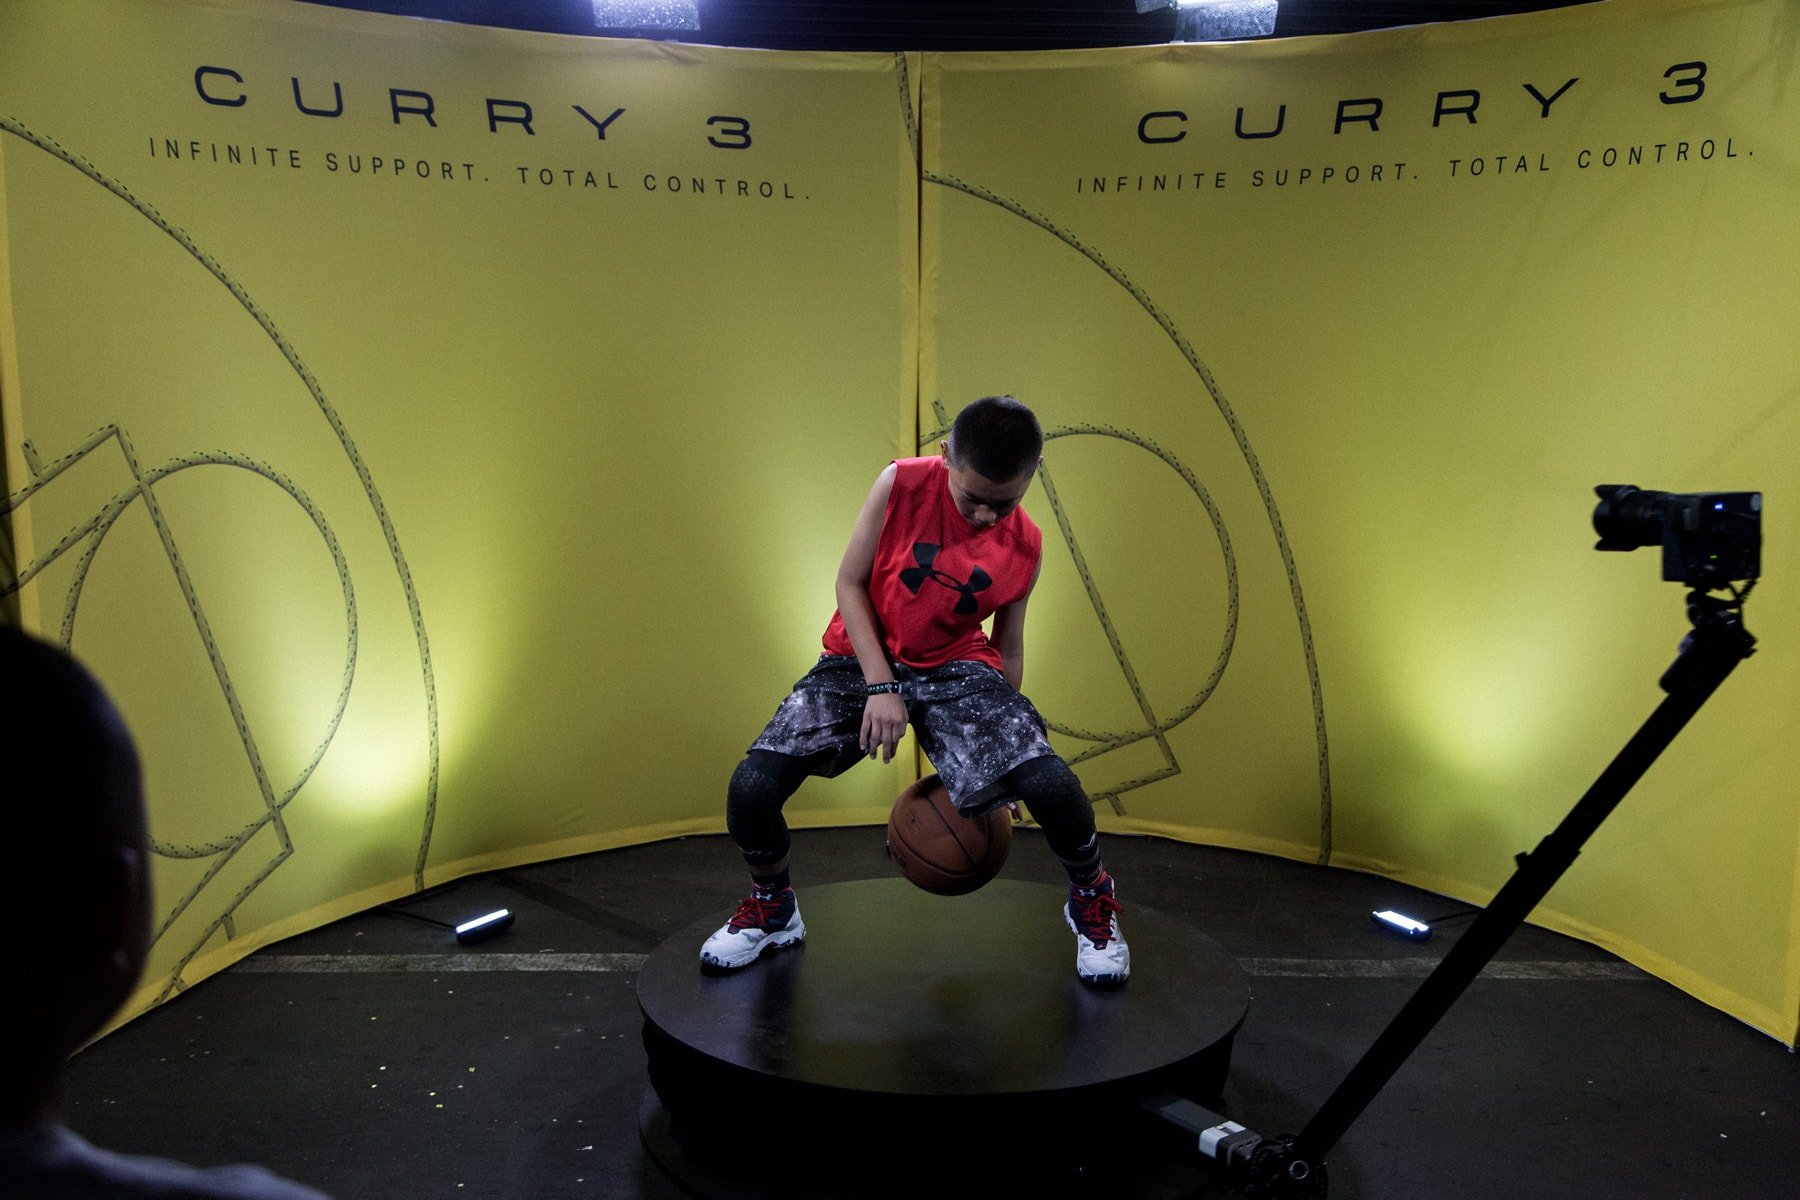 Under Armour Stephen Curry 3 Sneaker Launch Event San Francisco basketball warriors